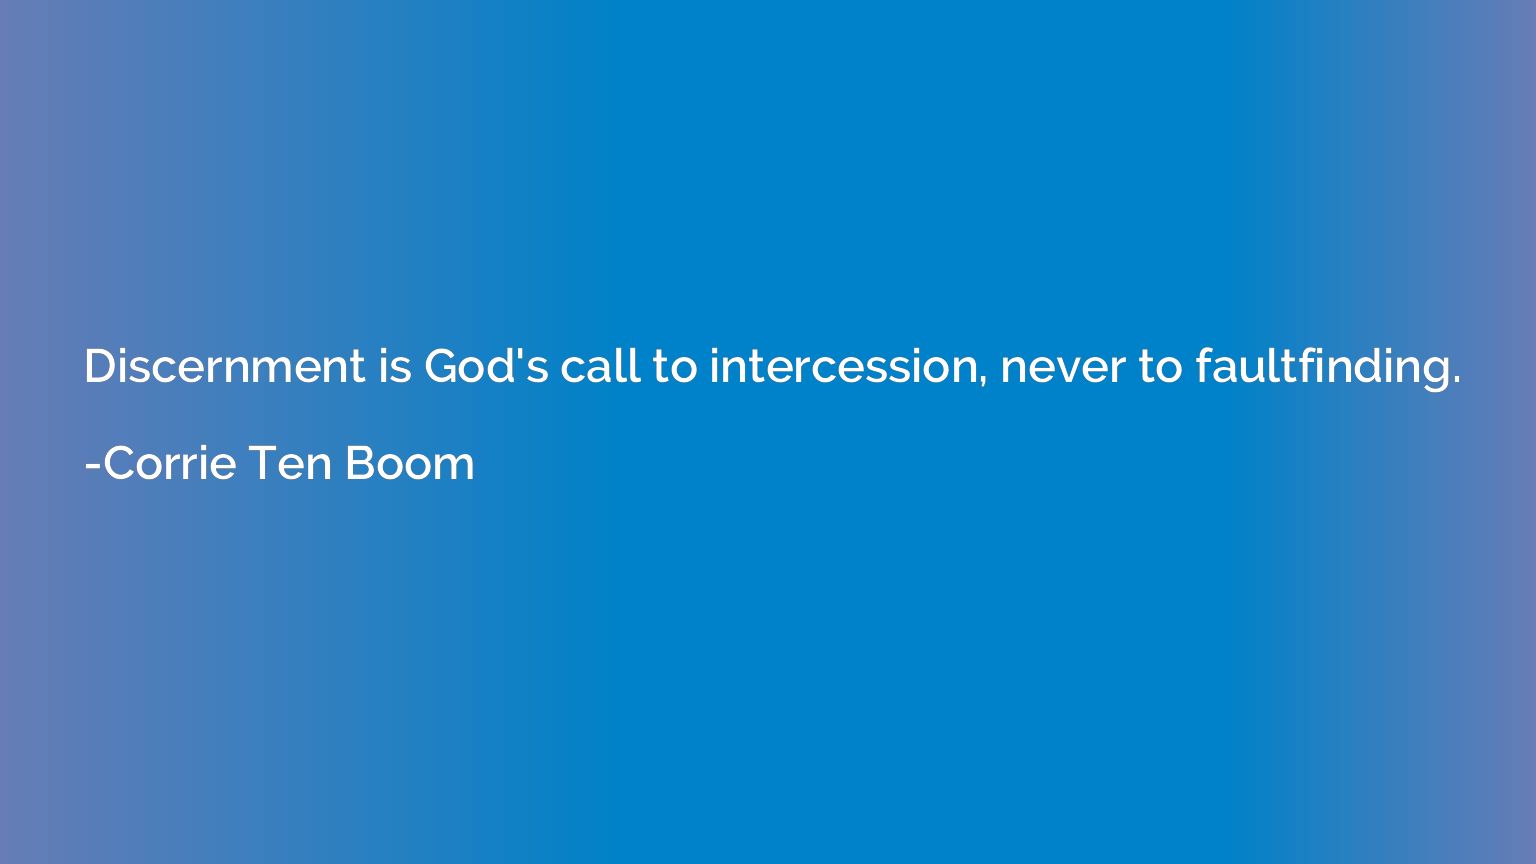 Discernment is God's call to intercession, never to faultfin